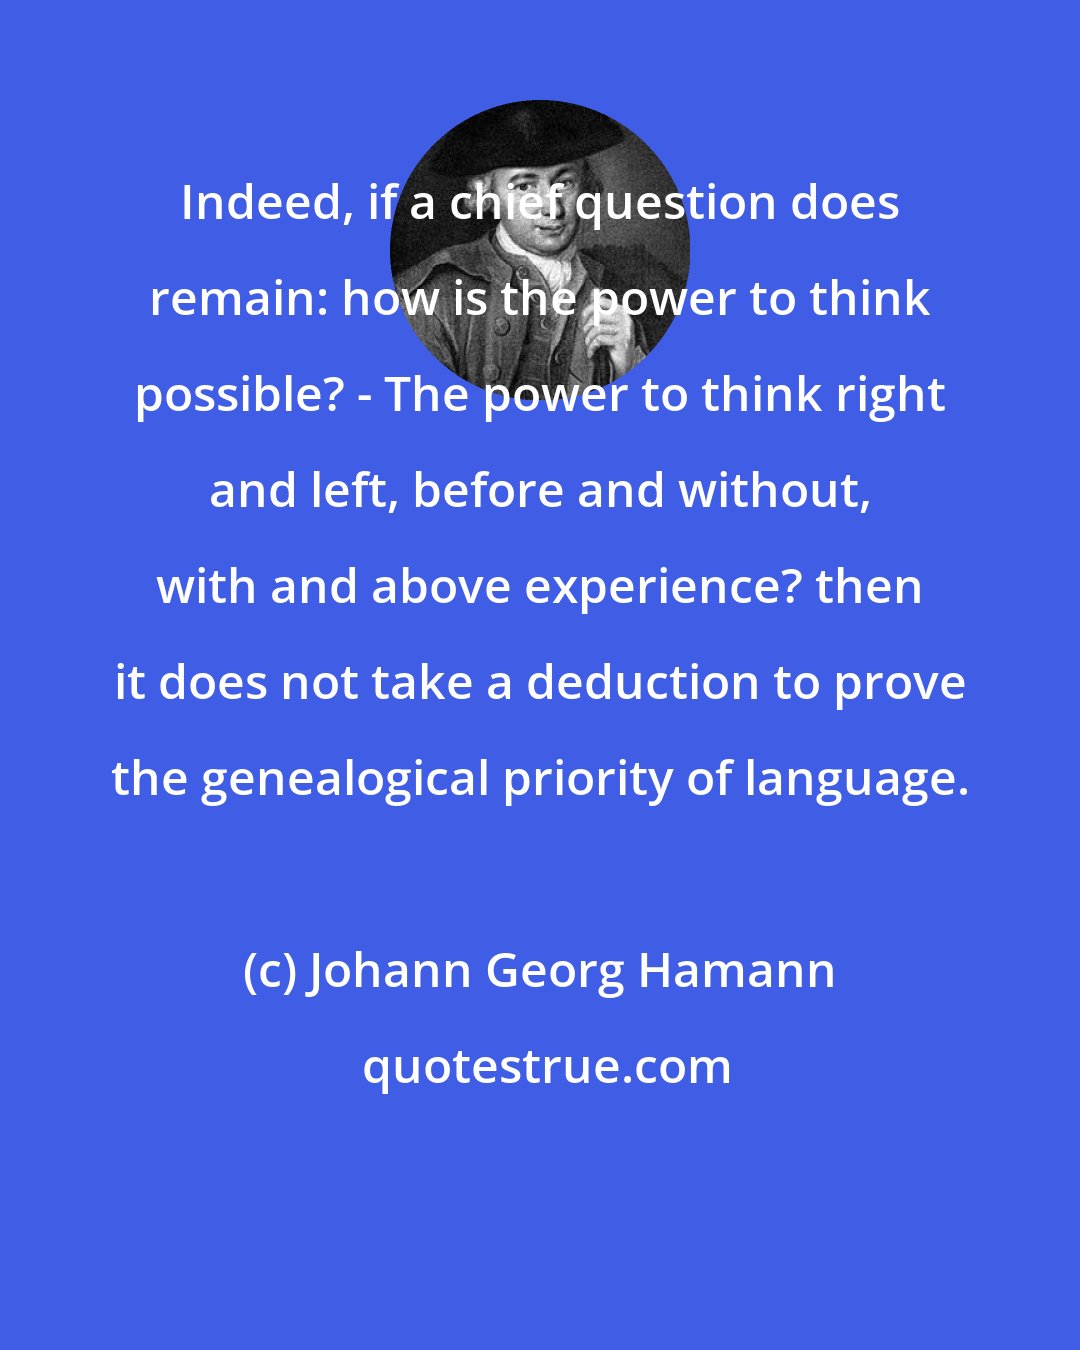 Johann Georg Hamann: Indeed, if a chief question does remain: how is the power to think possible? - The power to think right and left, before and without, with and above experience? then it does not take a deduction to prove the genealogical priority of language.